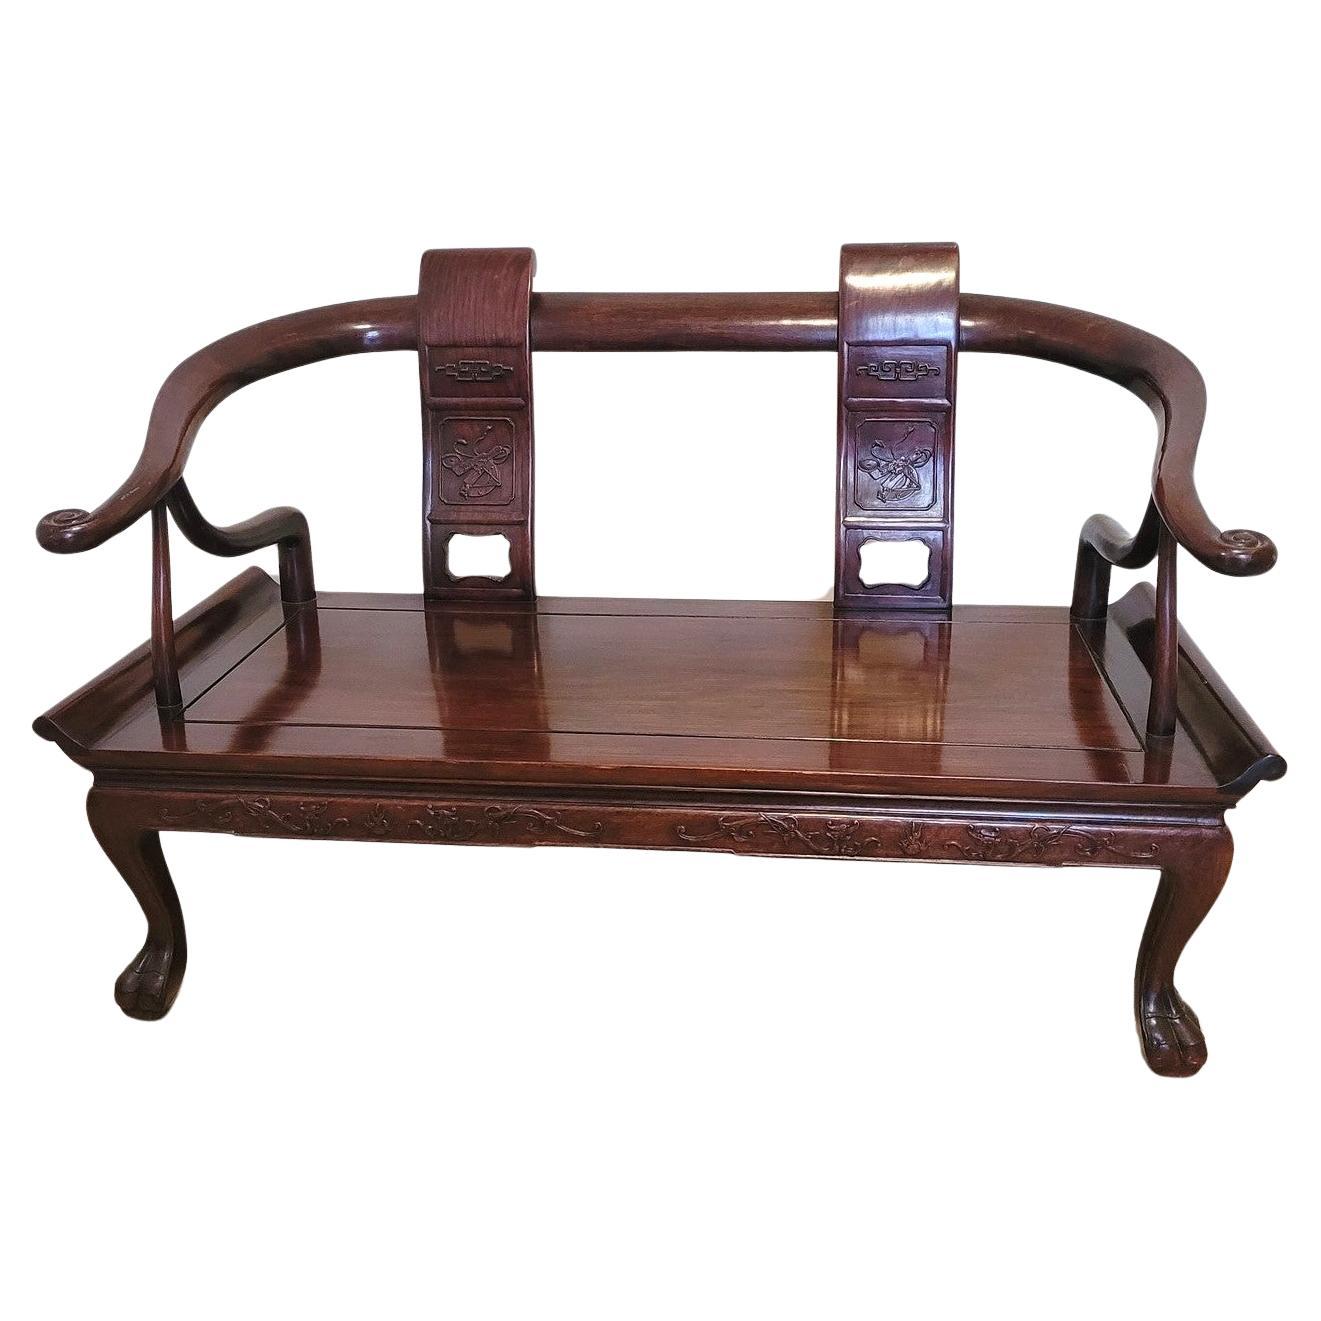 Chinese Carved Wood Bench, Late 19th Early 20th Century For Sale